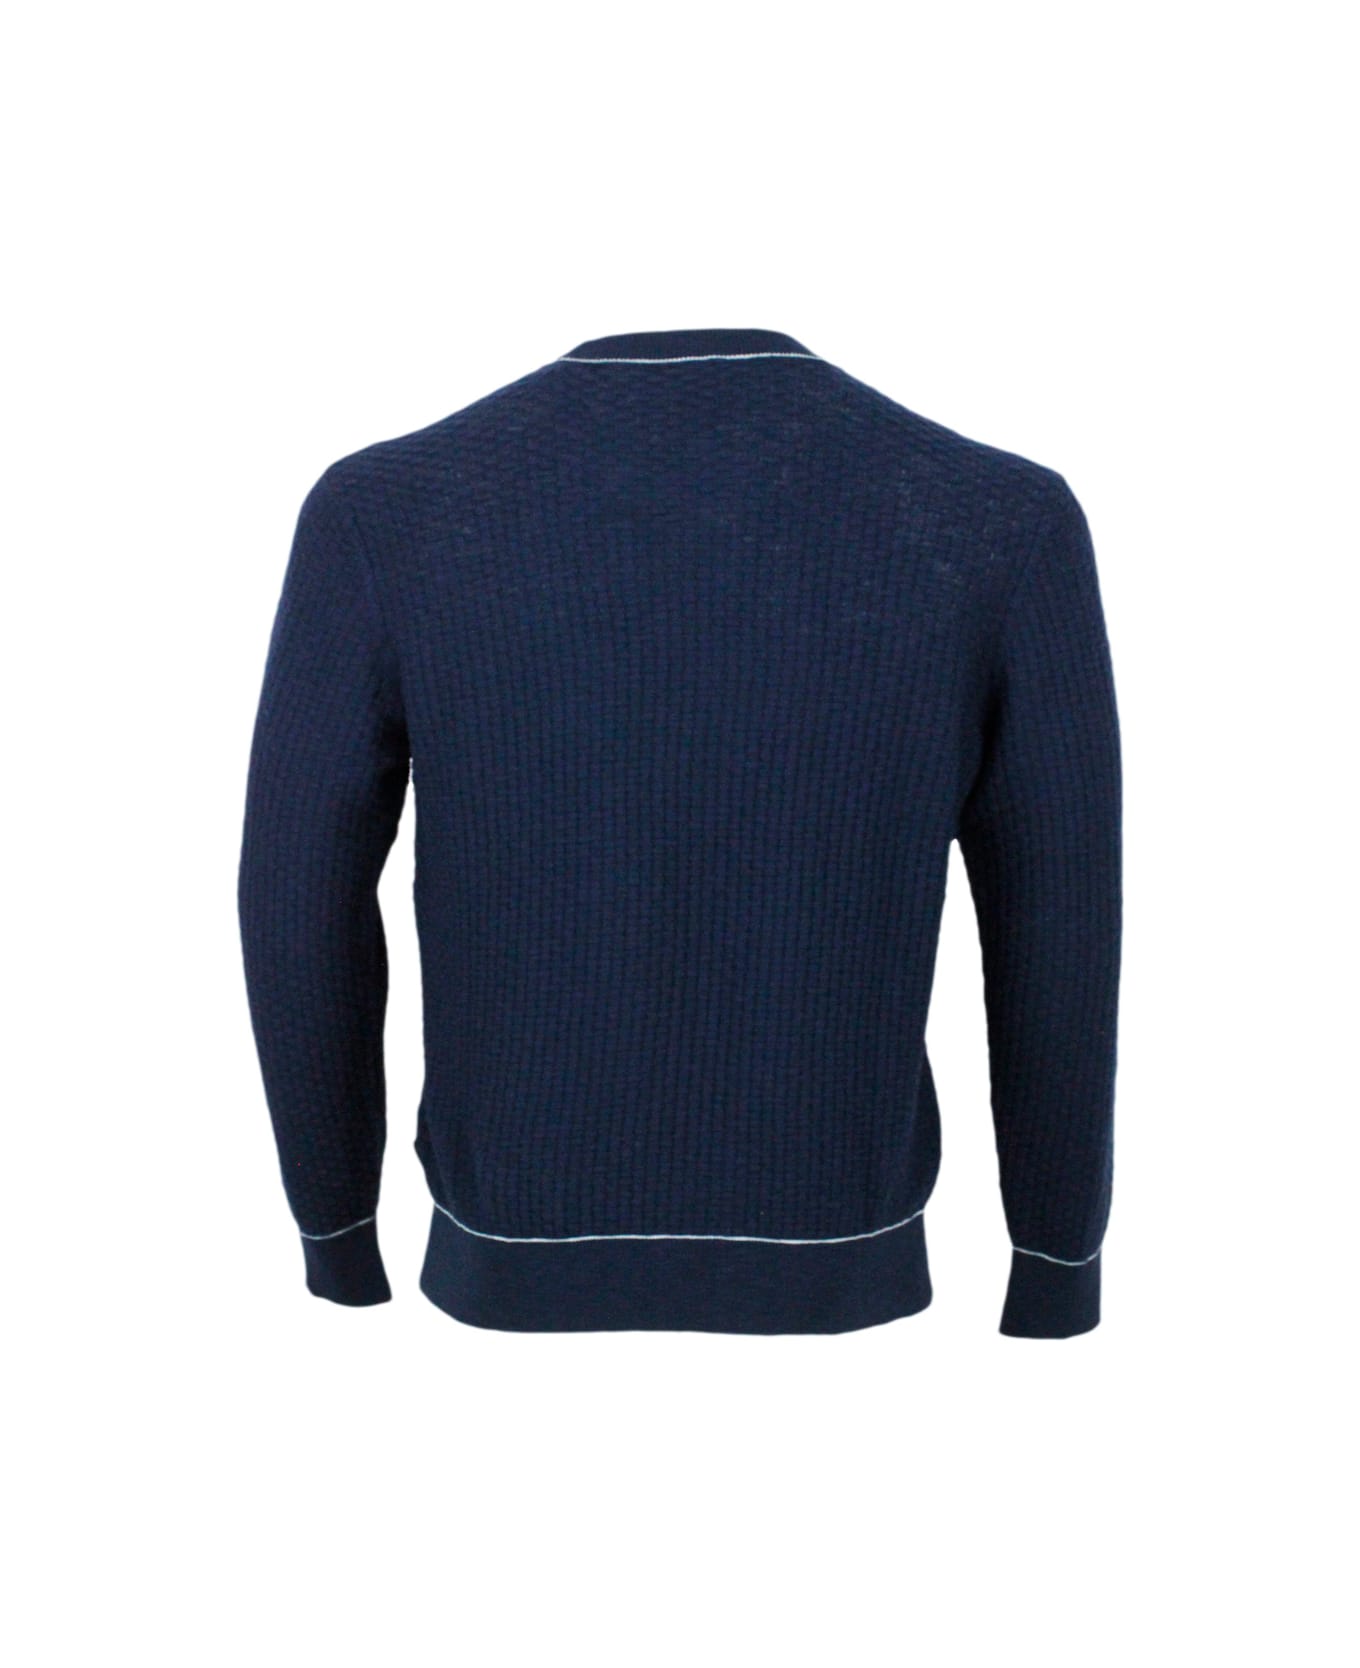 Armani Collezioni Crew-neck And Long-sleeved Sweater In Cotton And Linen With Honeycomb Workmanship. - Blu ニットウェア